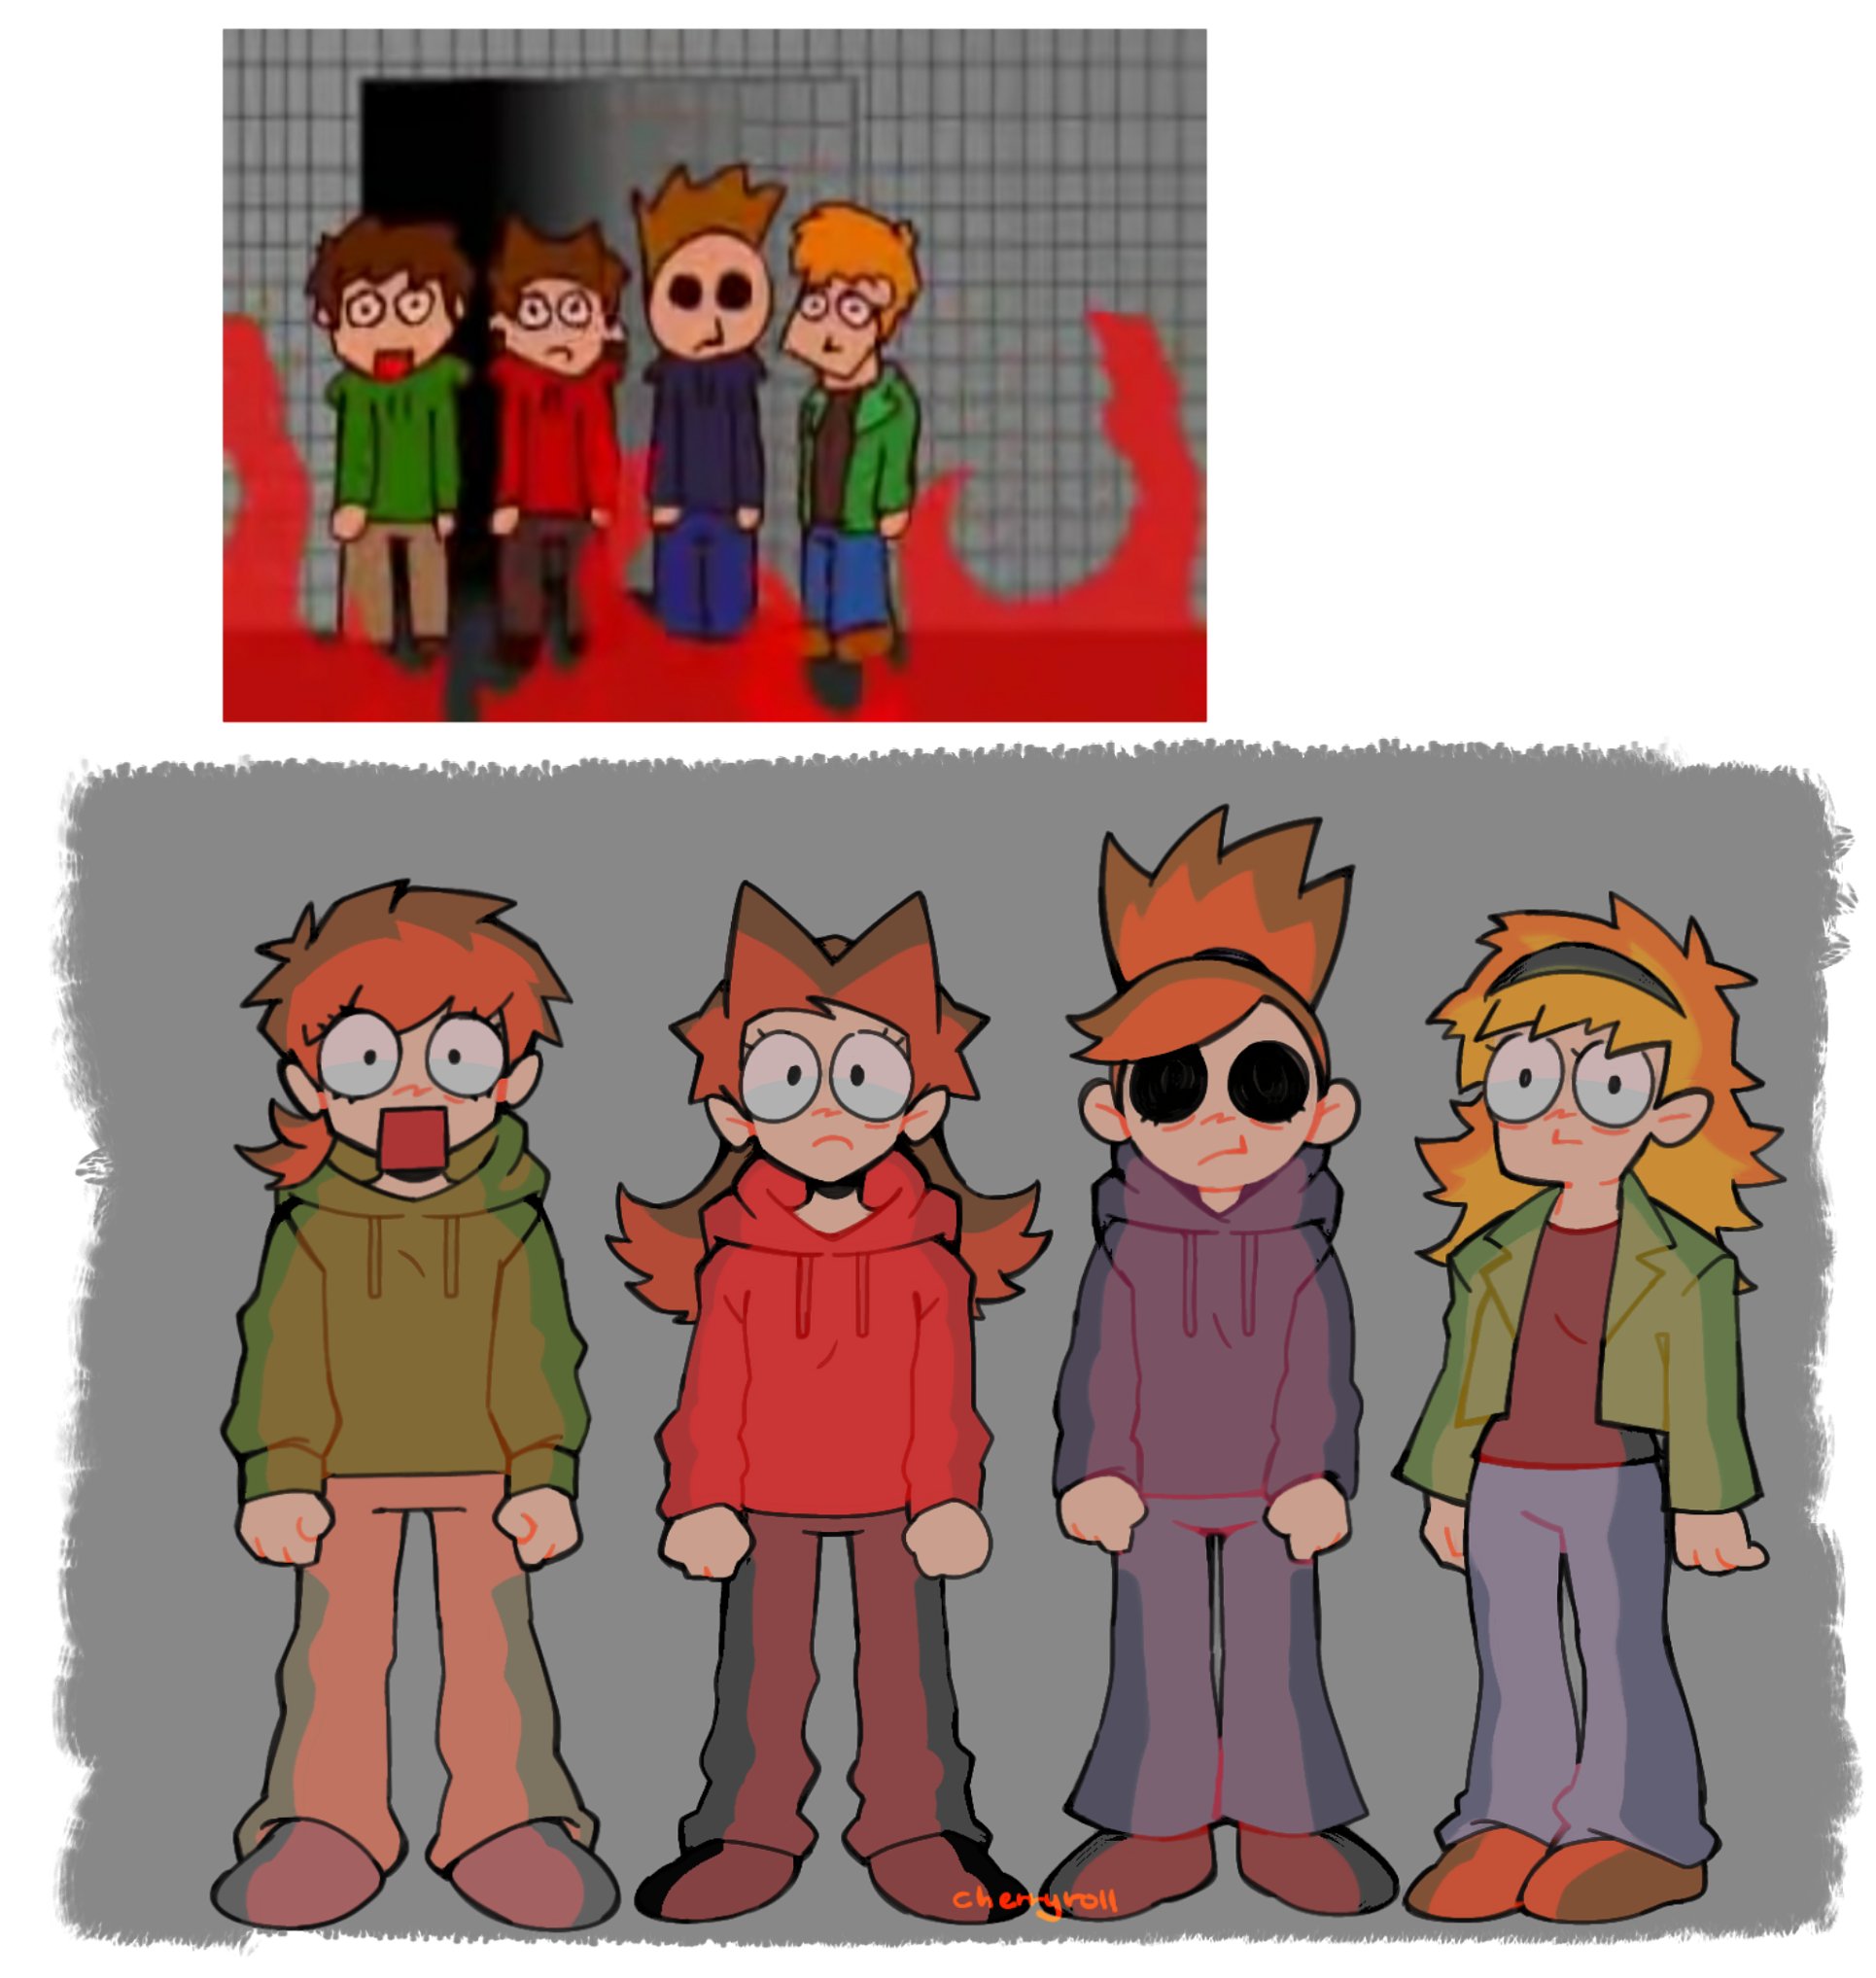 A nothing royal family (2004 Eddsworld) by CherrydoBoloAconha on